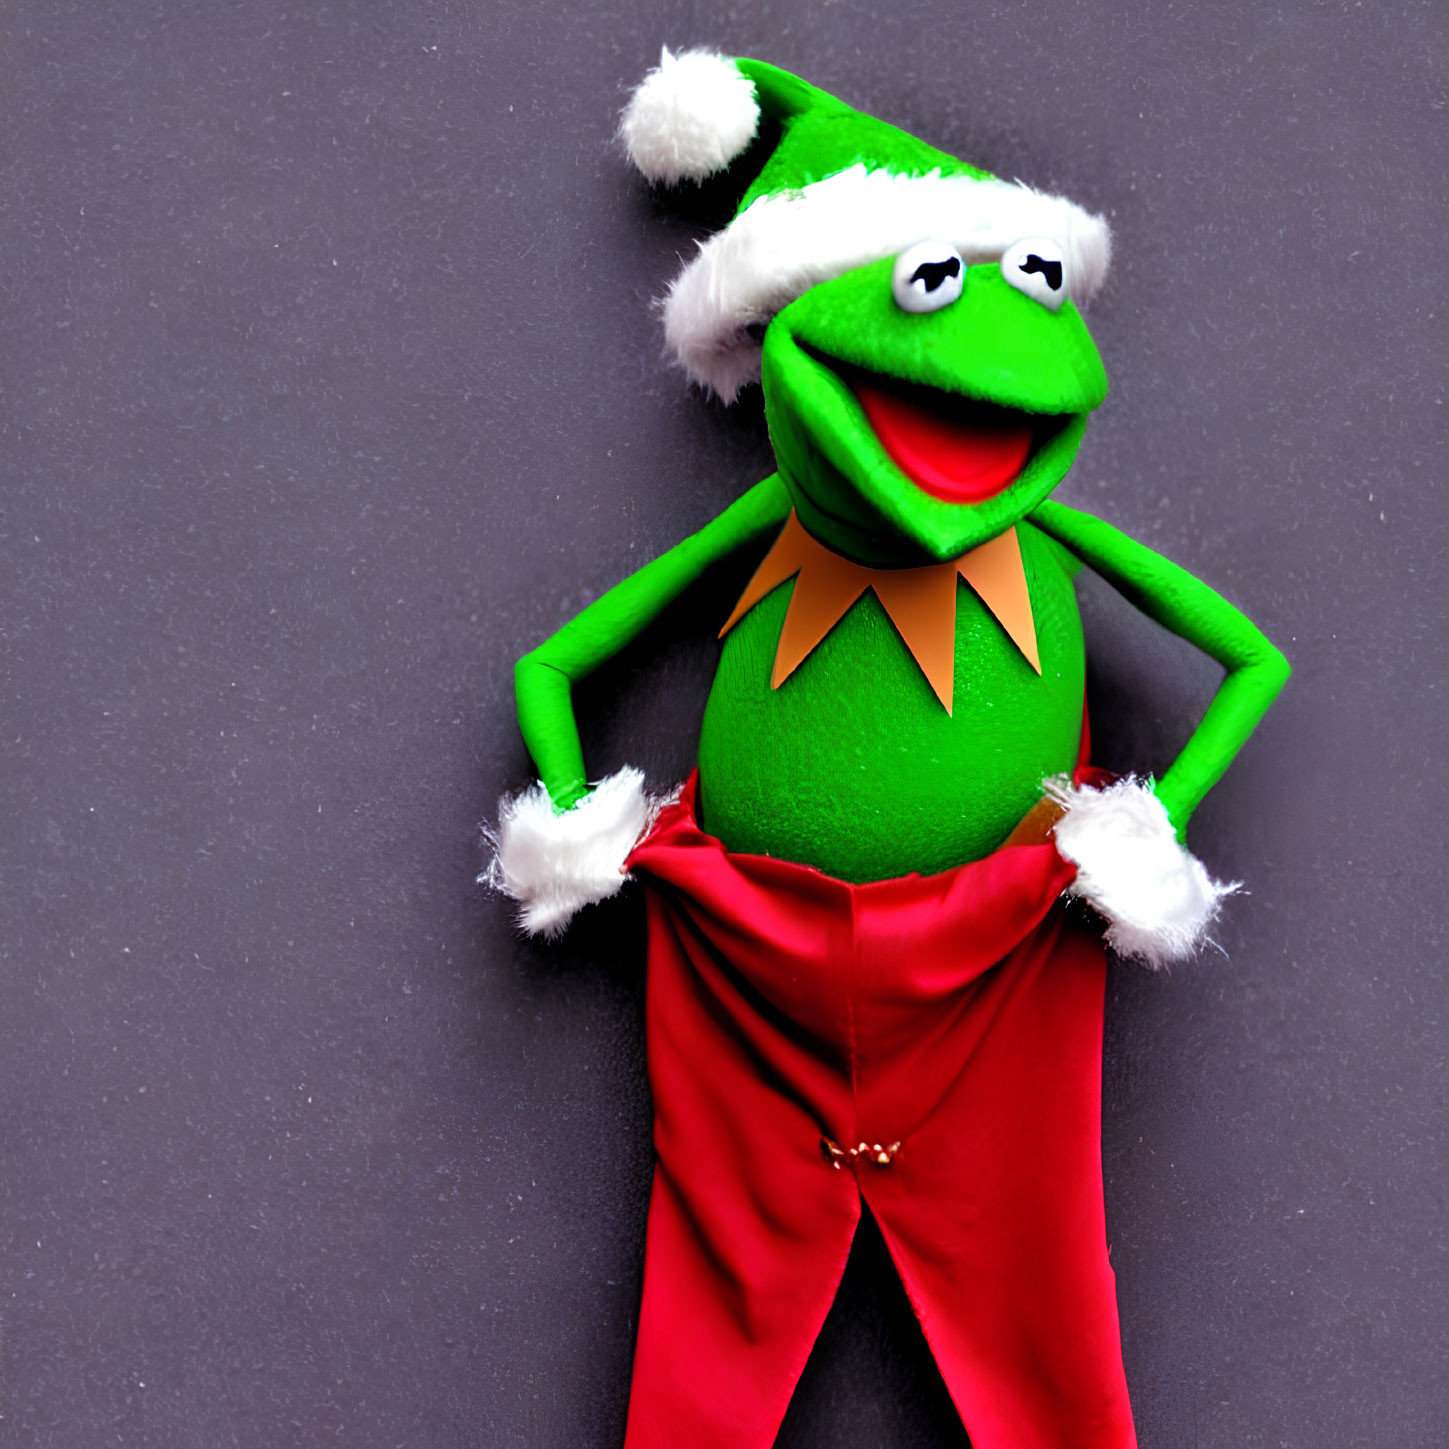 Festive Kermit the Frog Plush Toy in Christmas Outfit